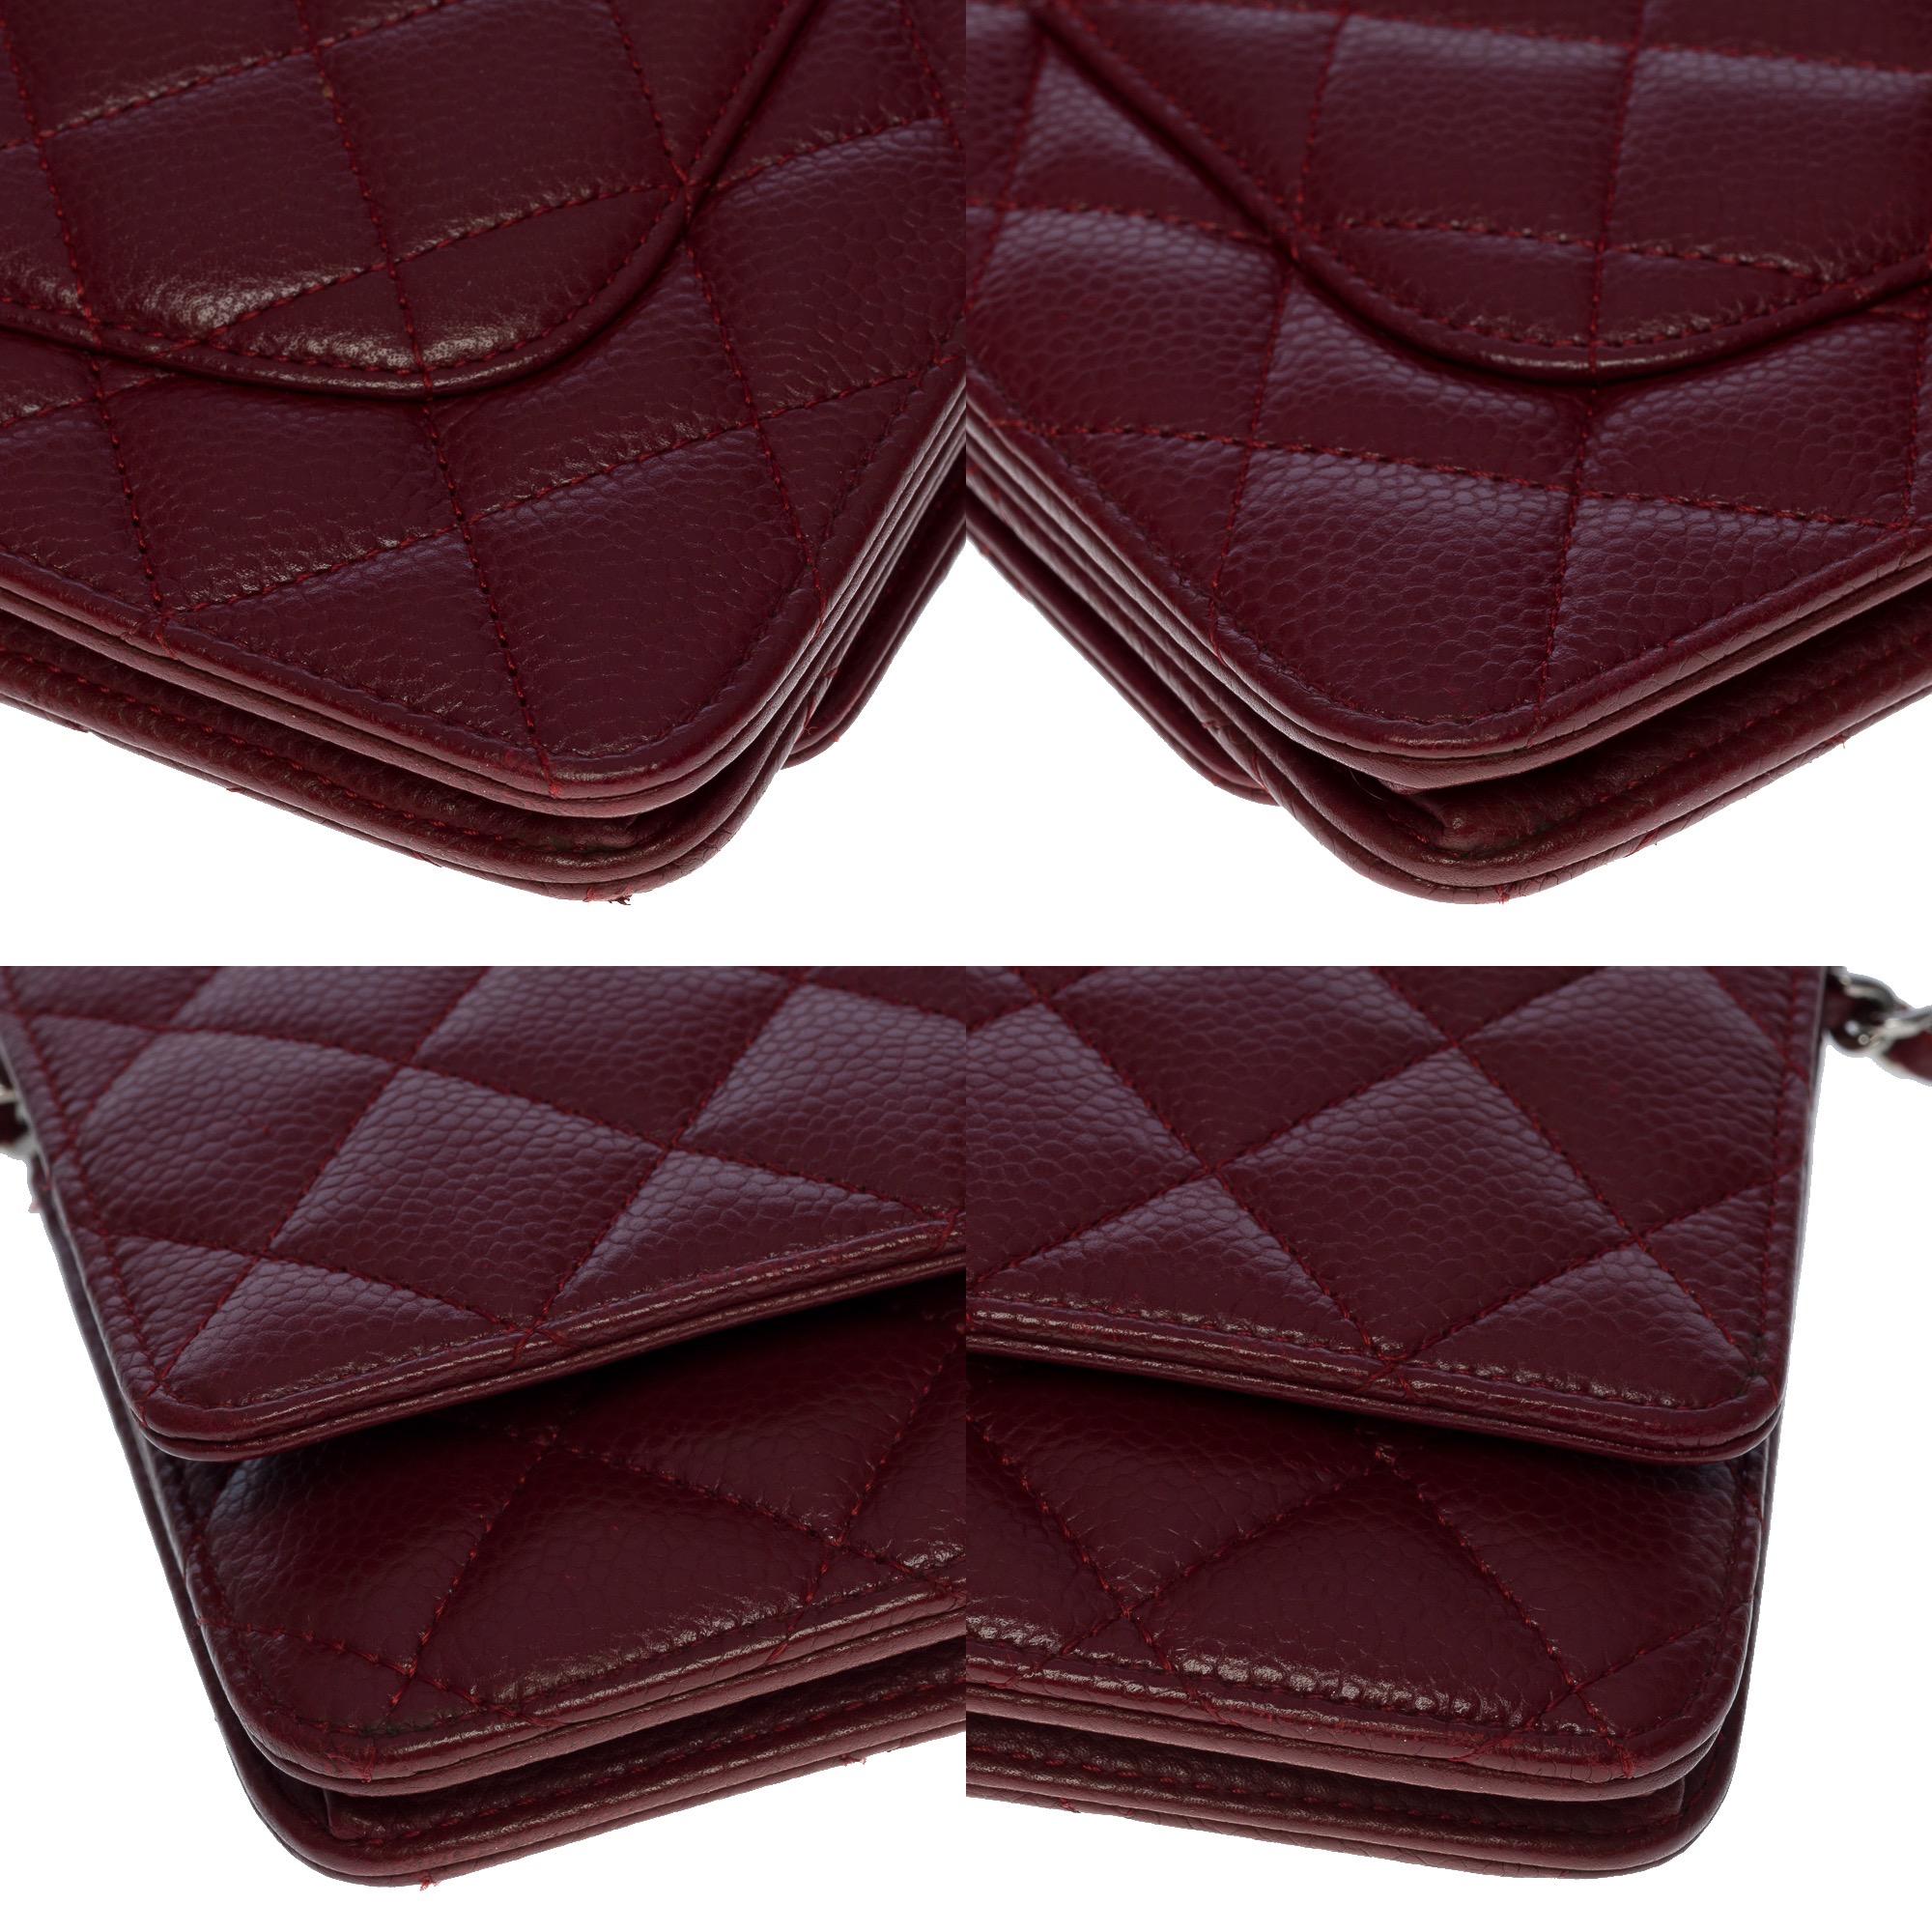 Chanel Wallet On Chain handbag in burgundy quilted caviar leather, SHW 7